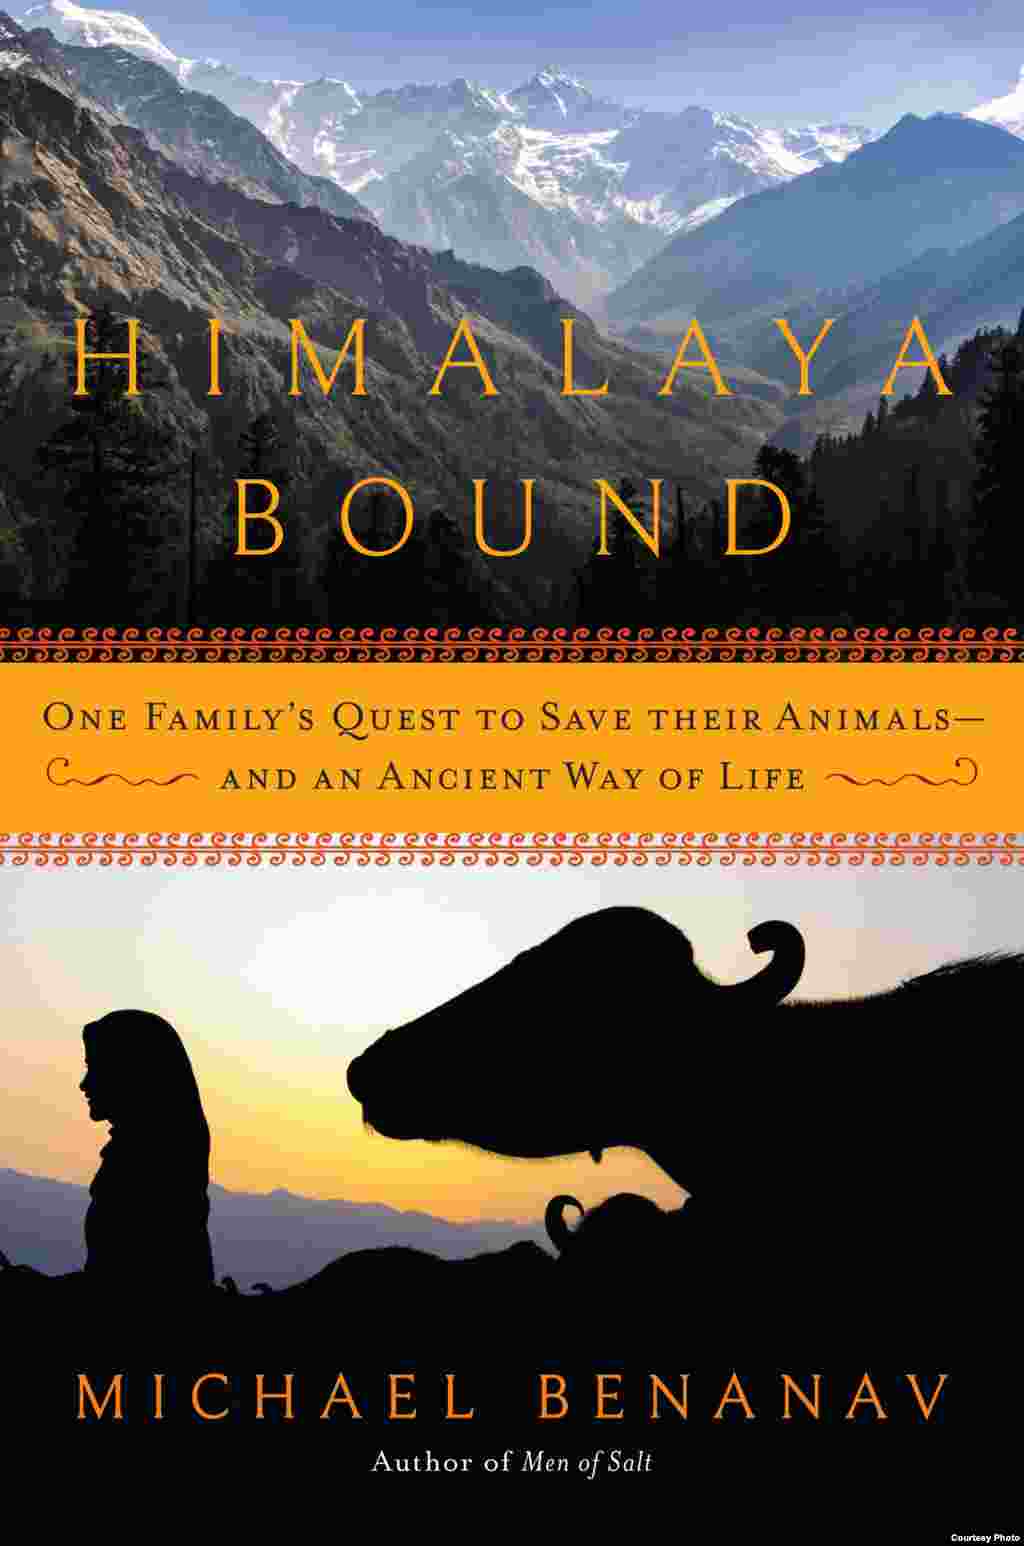 'Himalaya Bound' is Michael Benanav's latest book, chronicling one family's quest to save their animals and an ancient way of life.